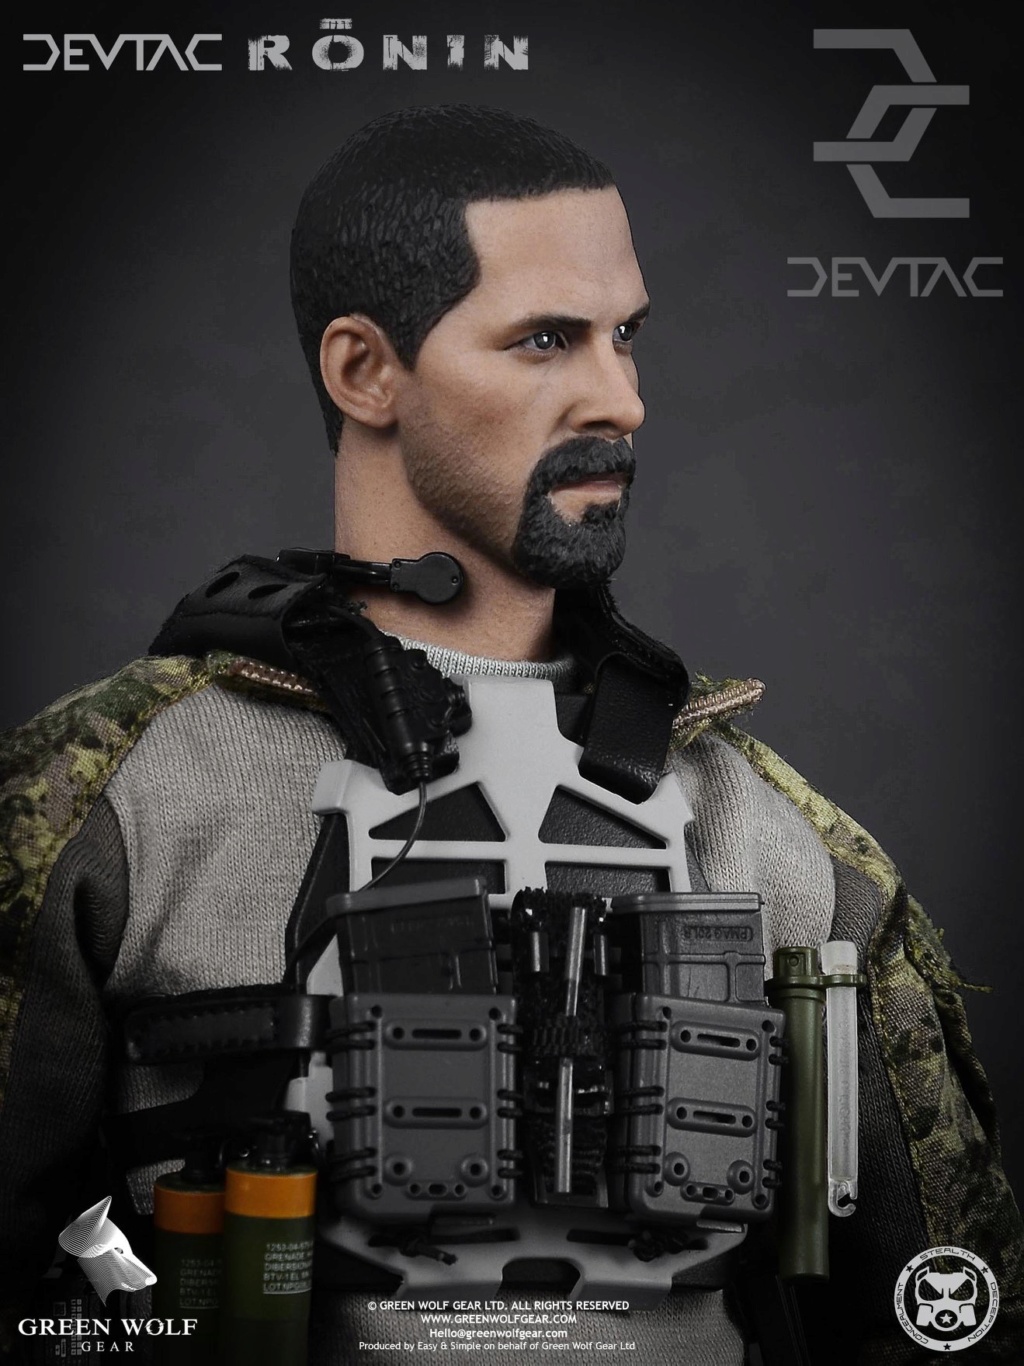 modernmilitary - NEW PRODUCT: Green Wolf Gear DEVTAC Ronin 1/6 Action Figure (VS2434P) 2223